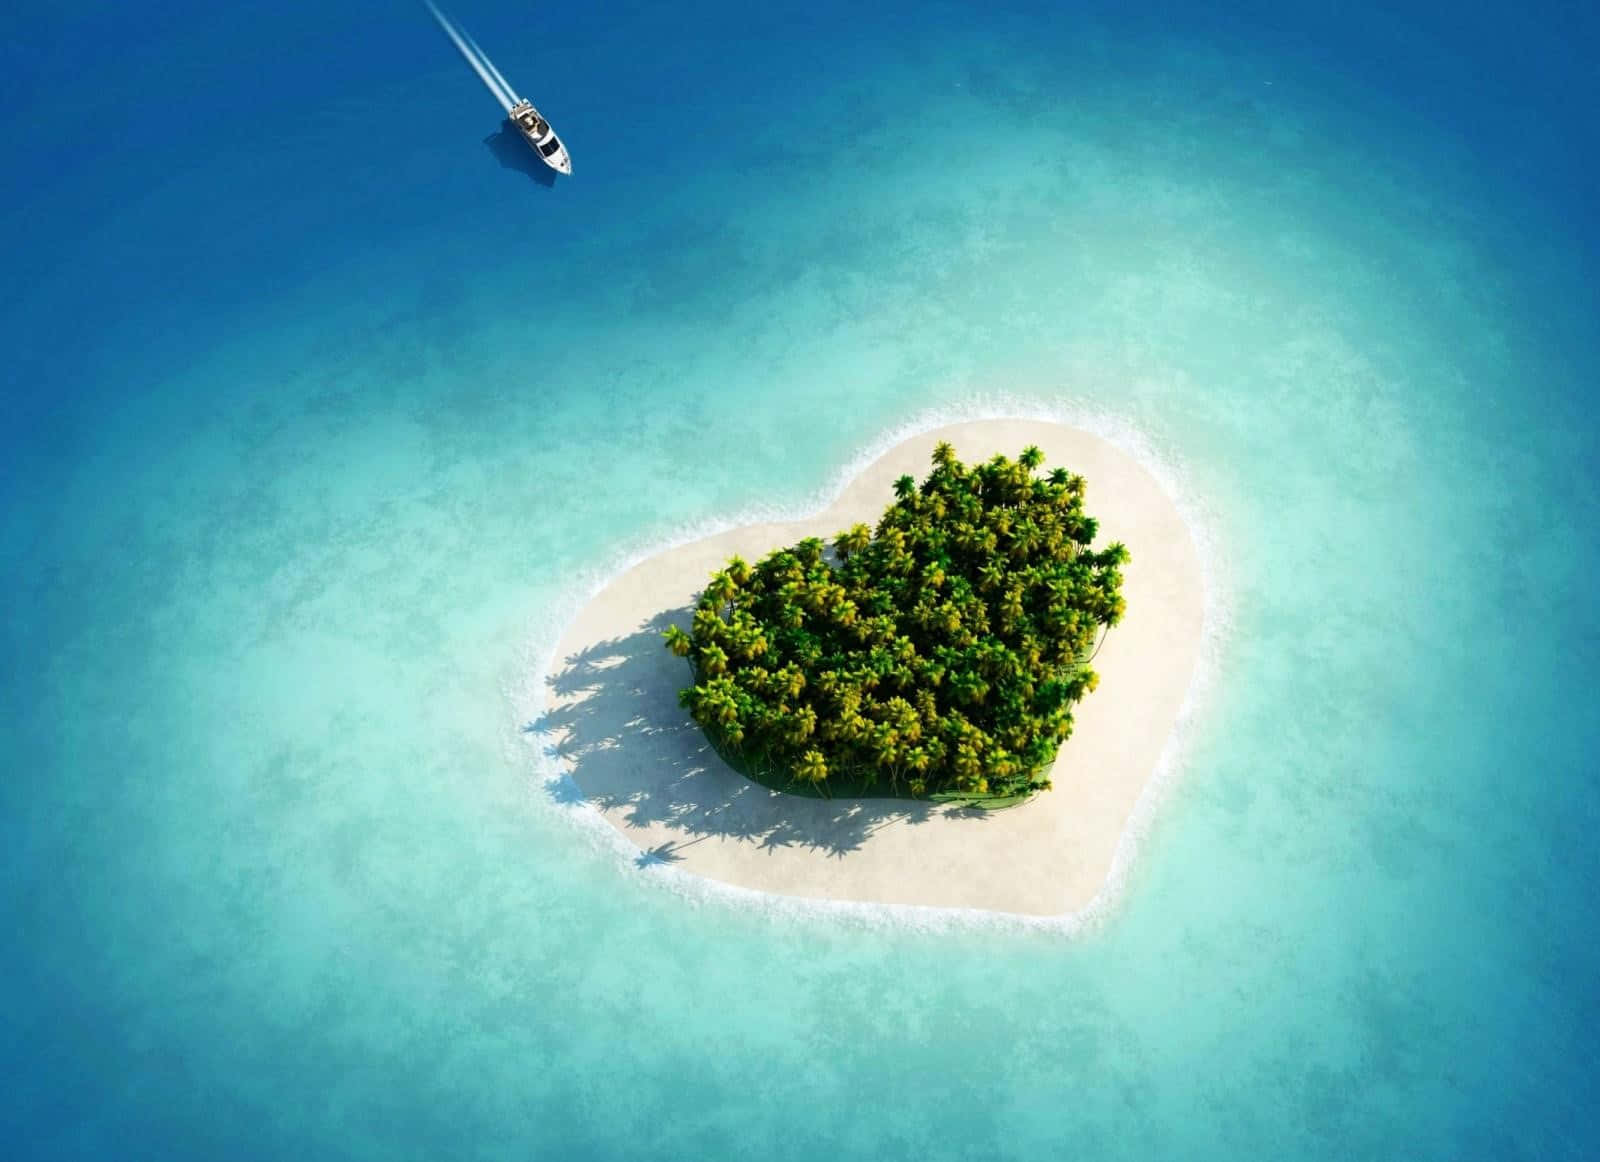 A Heart Shaped Island With A Boat In The Middle